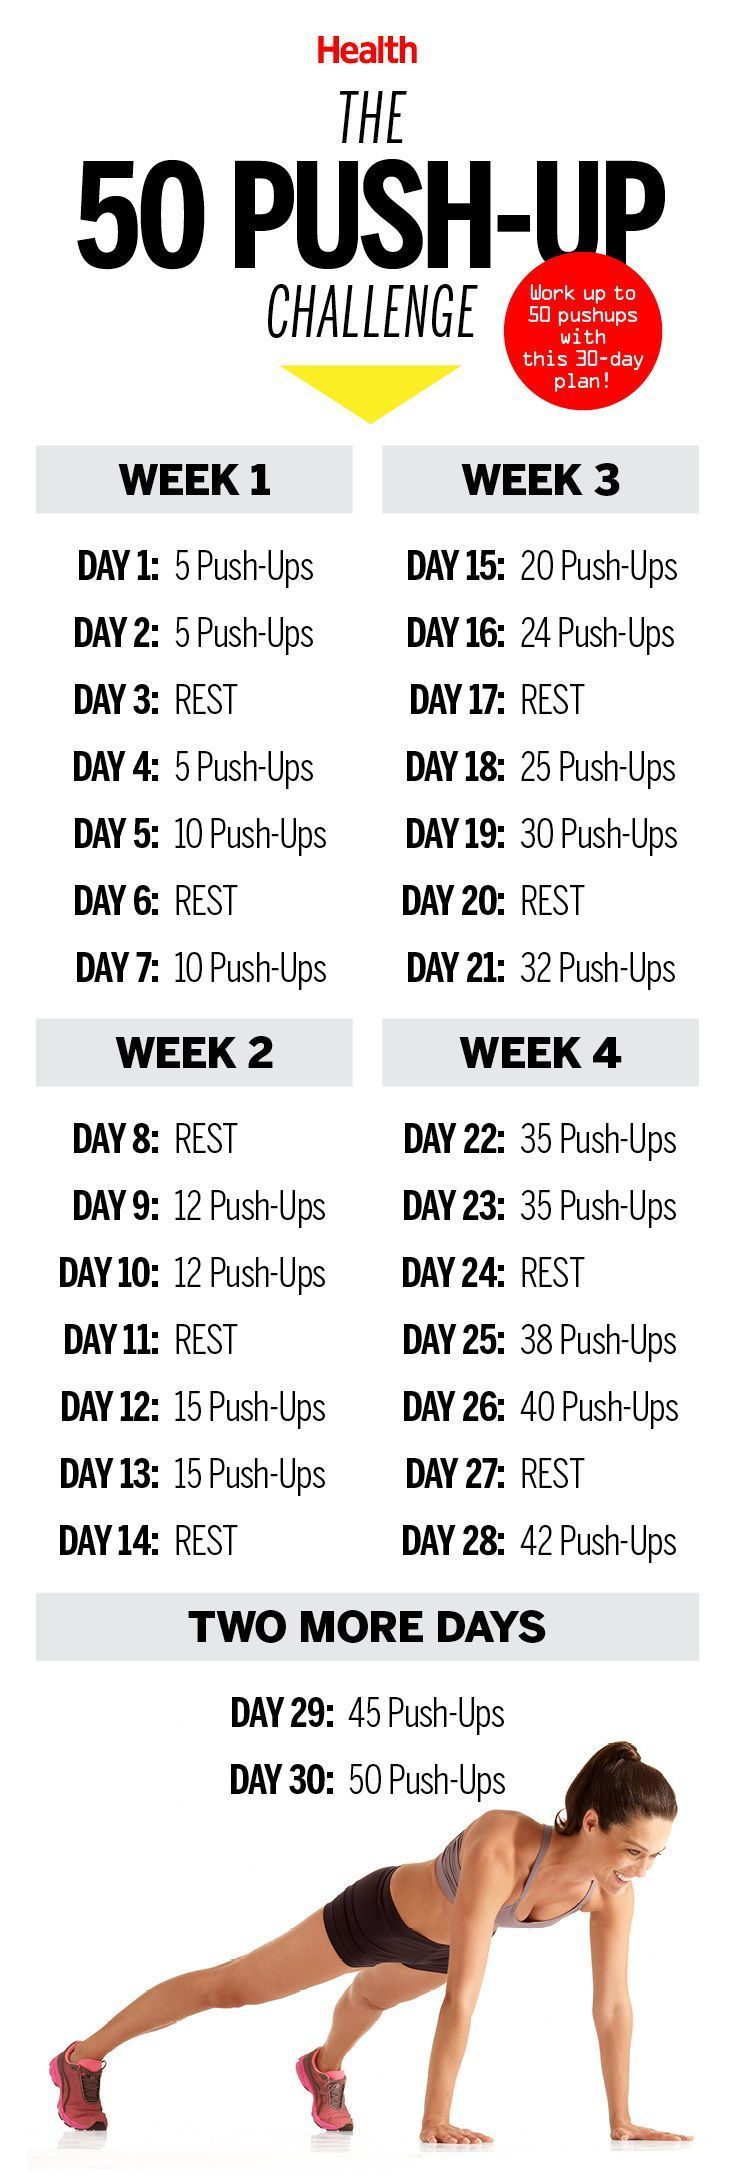 This 50 Push-Up Challenge Will Transform Your Body in 30 Days - This 50 Push-Up Challenge Will Transform Your Body in 30 Days -   18 fitness Training inspiration ideas